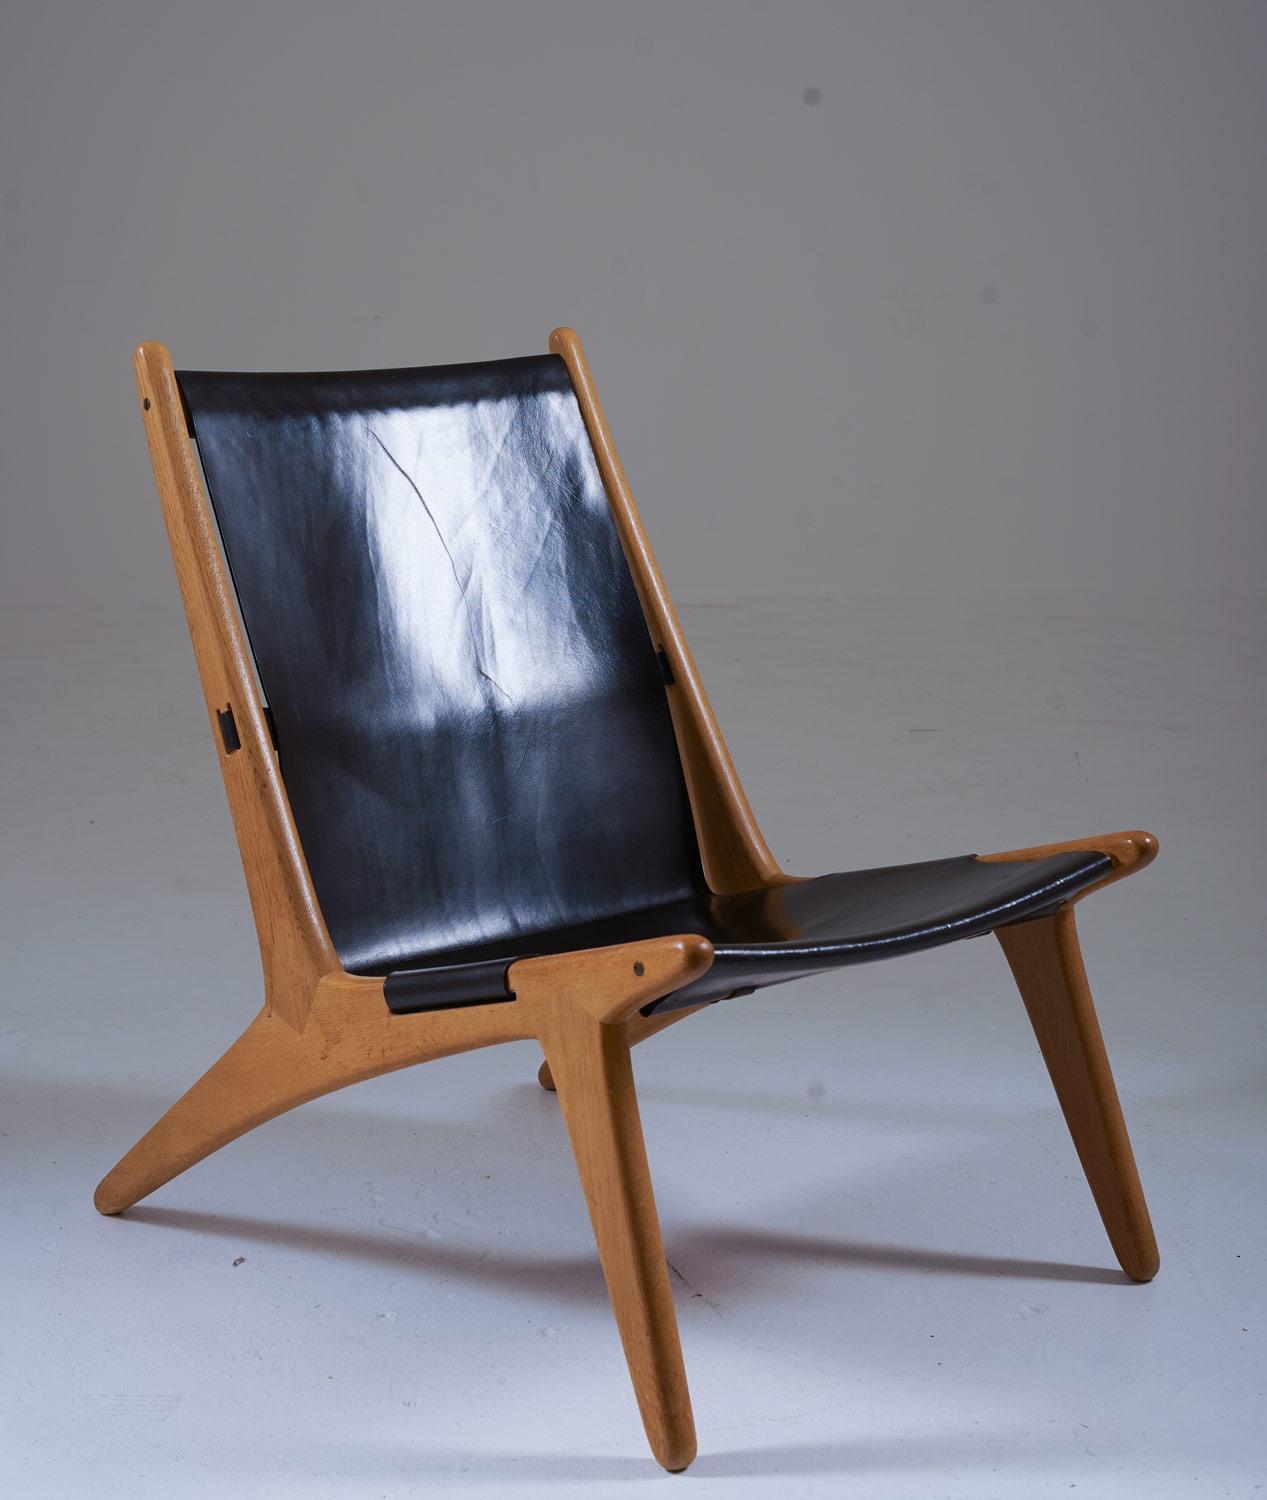 Rare lounge chair model 204 by Uno & Östen Kristiansson for Luxus, Sweden.
The hunting chair was designed by Uno and Östen Kristiansson in 1954 and belongs in the top of Swedish design history. The chair features a frame in oak and a leather